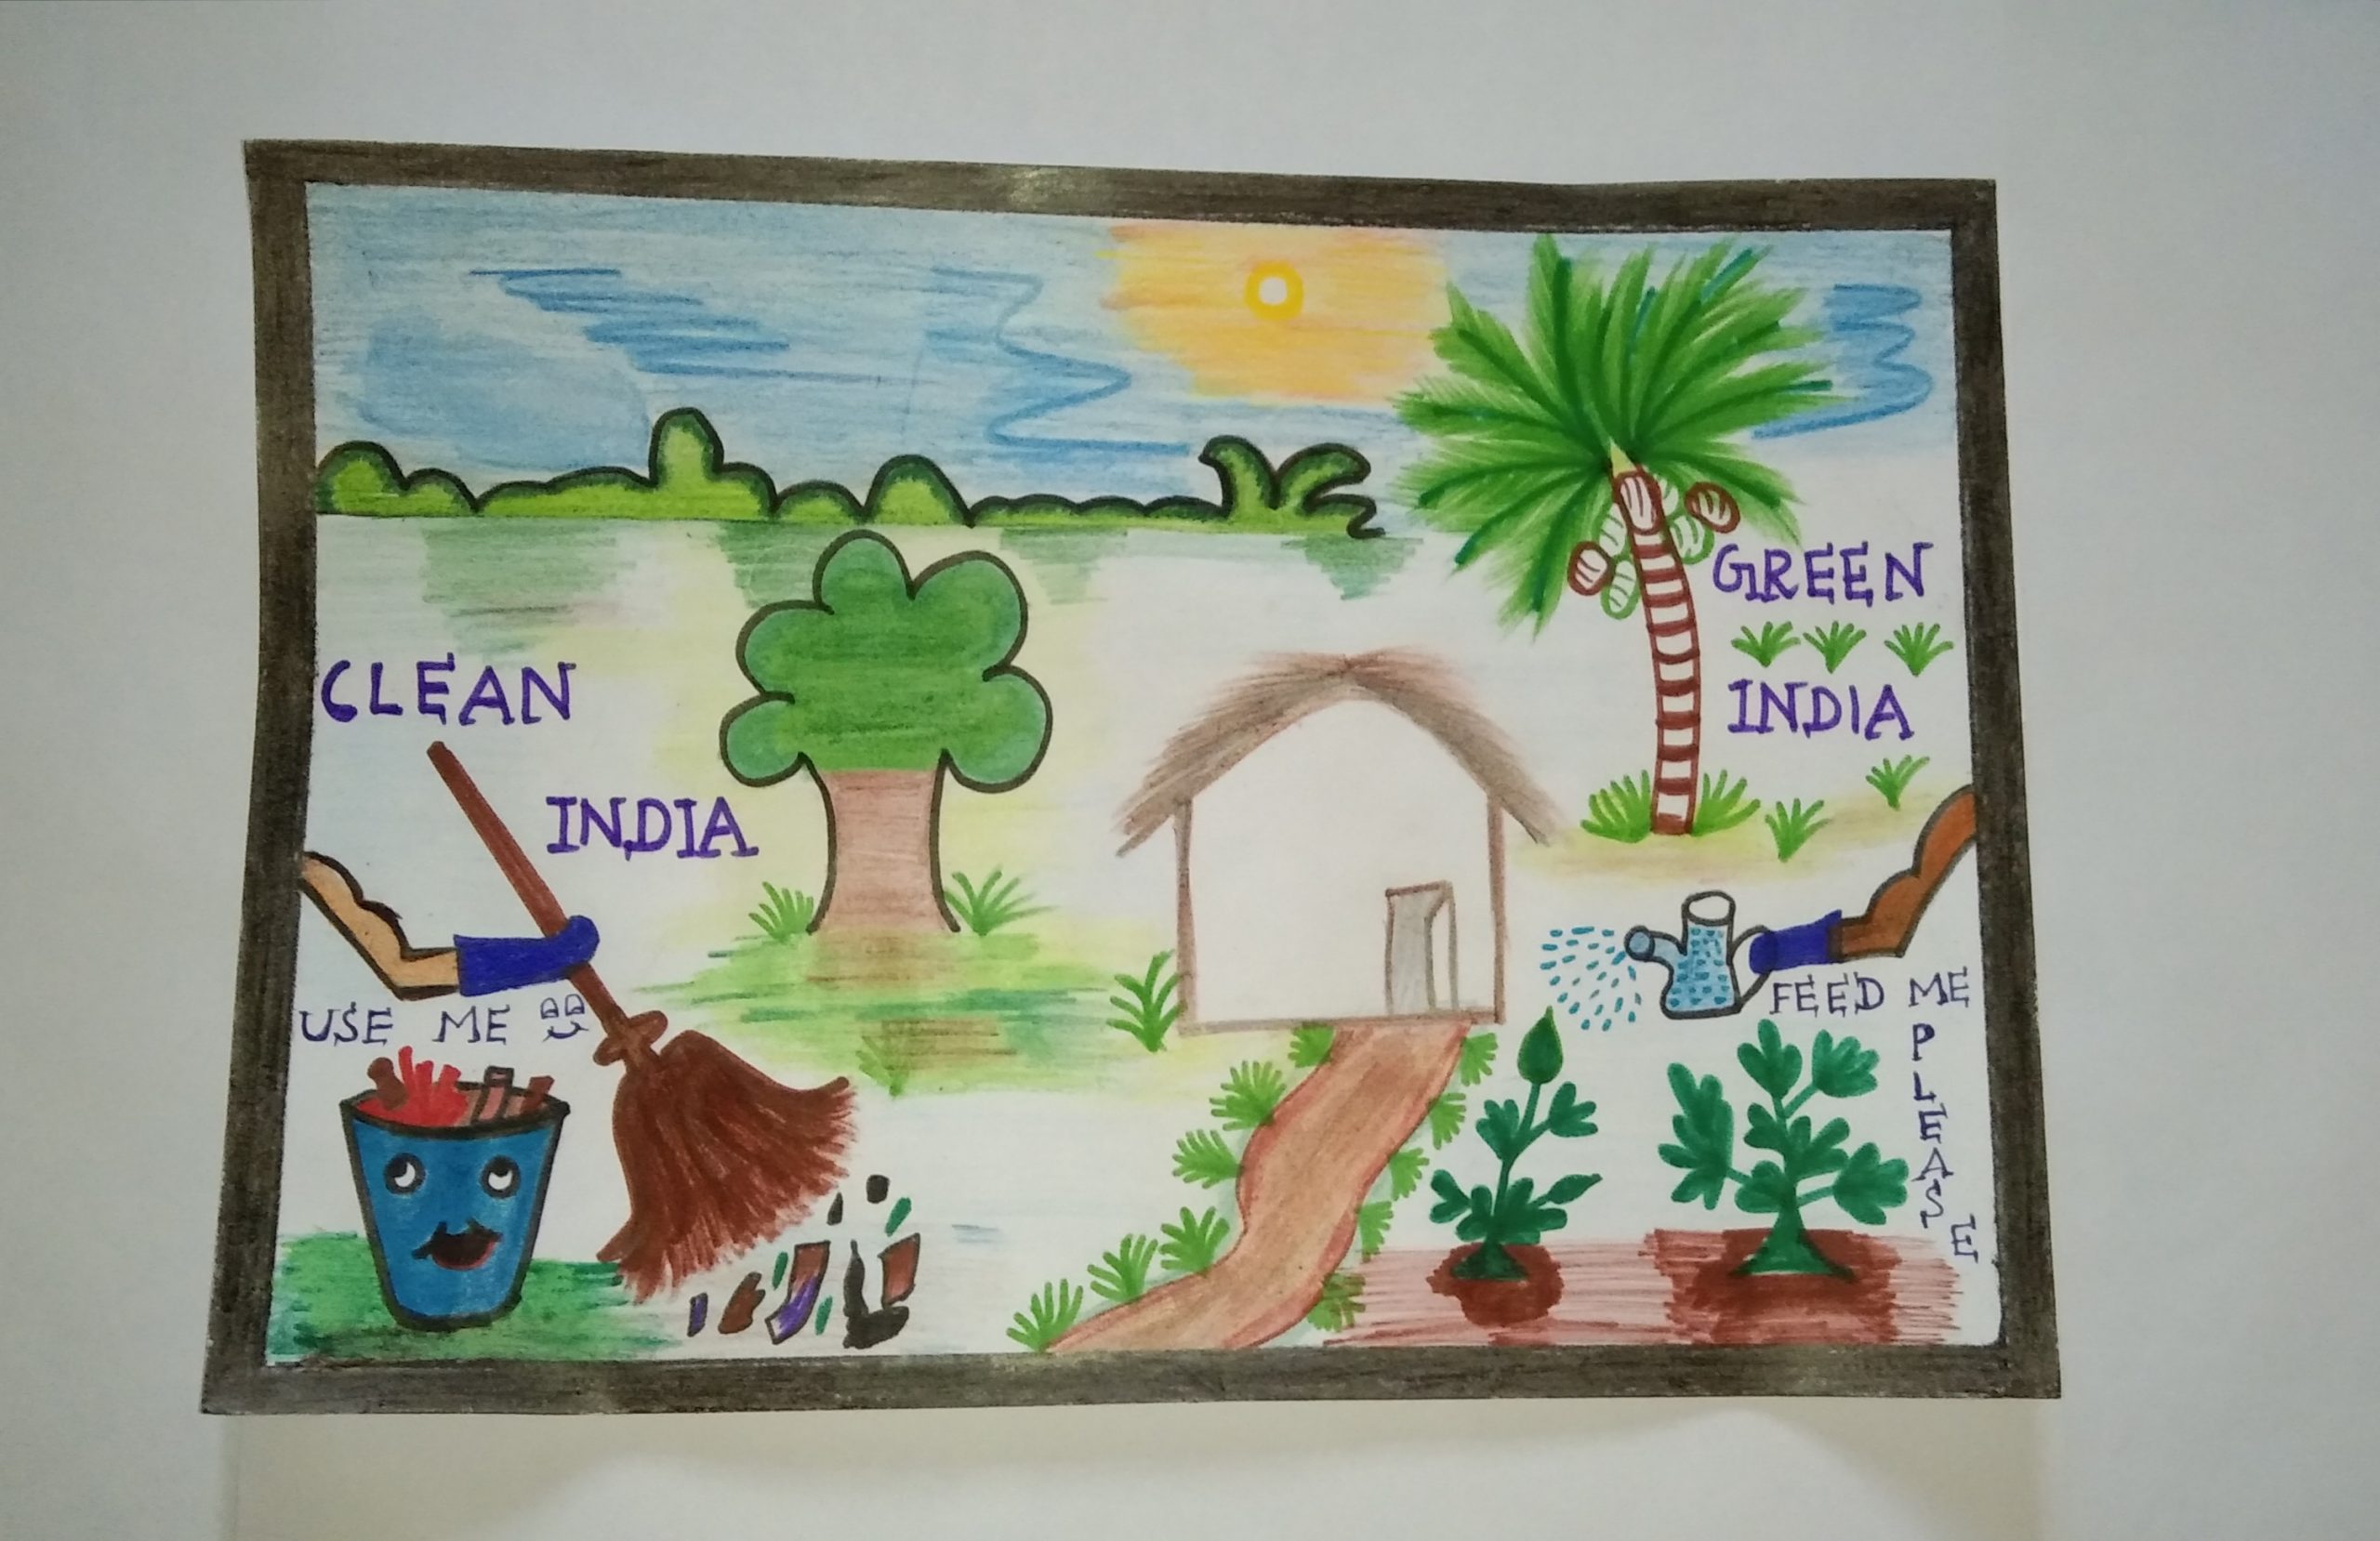 images of clean India for drawing competition - Brainly.in-saigonsouth.com.vn